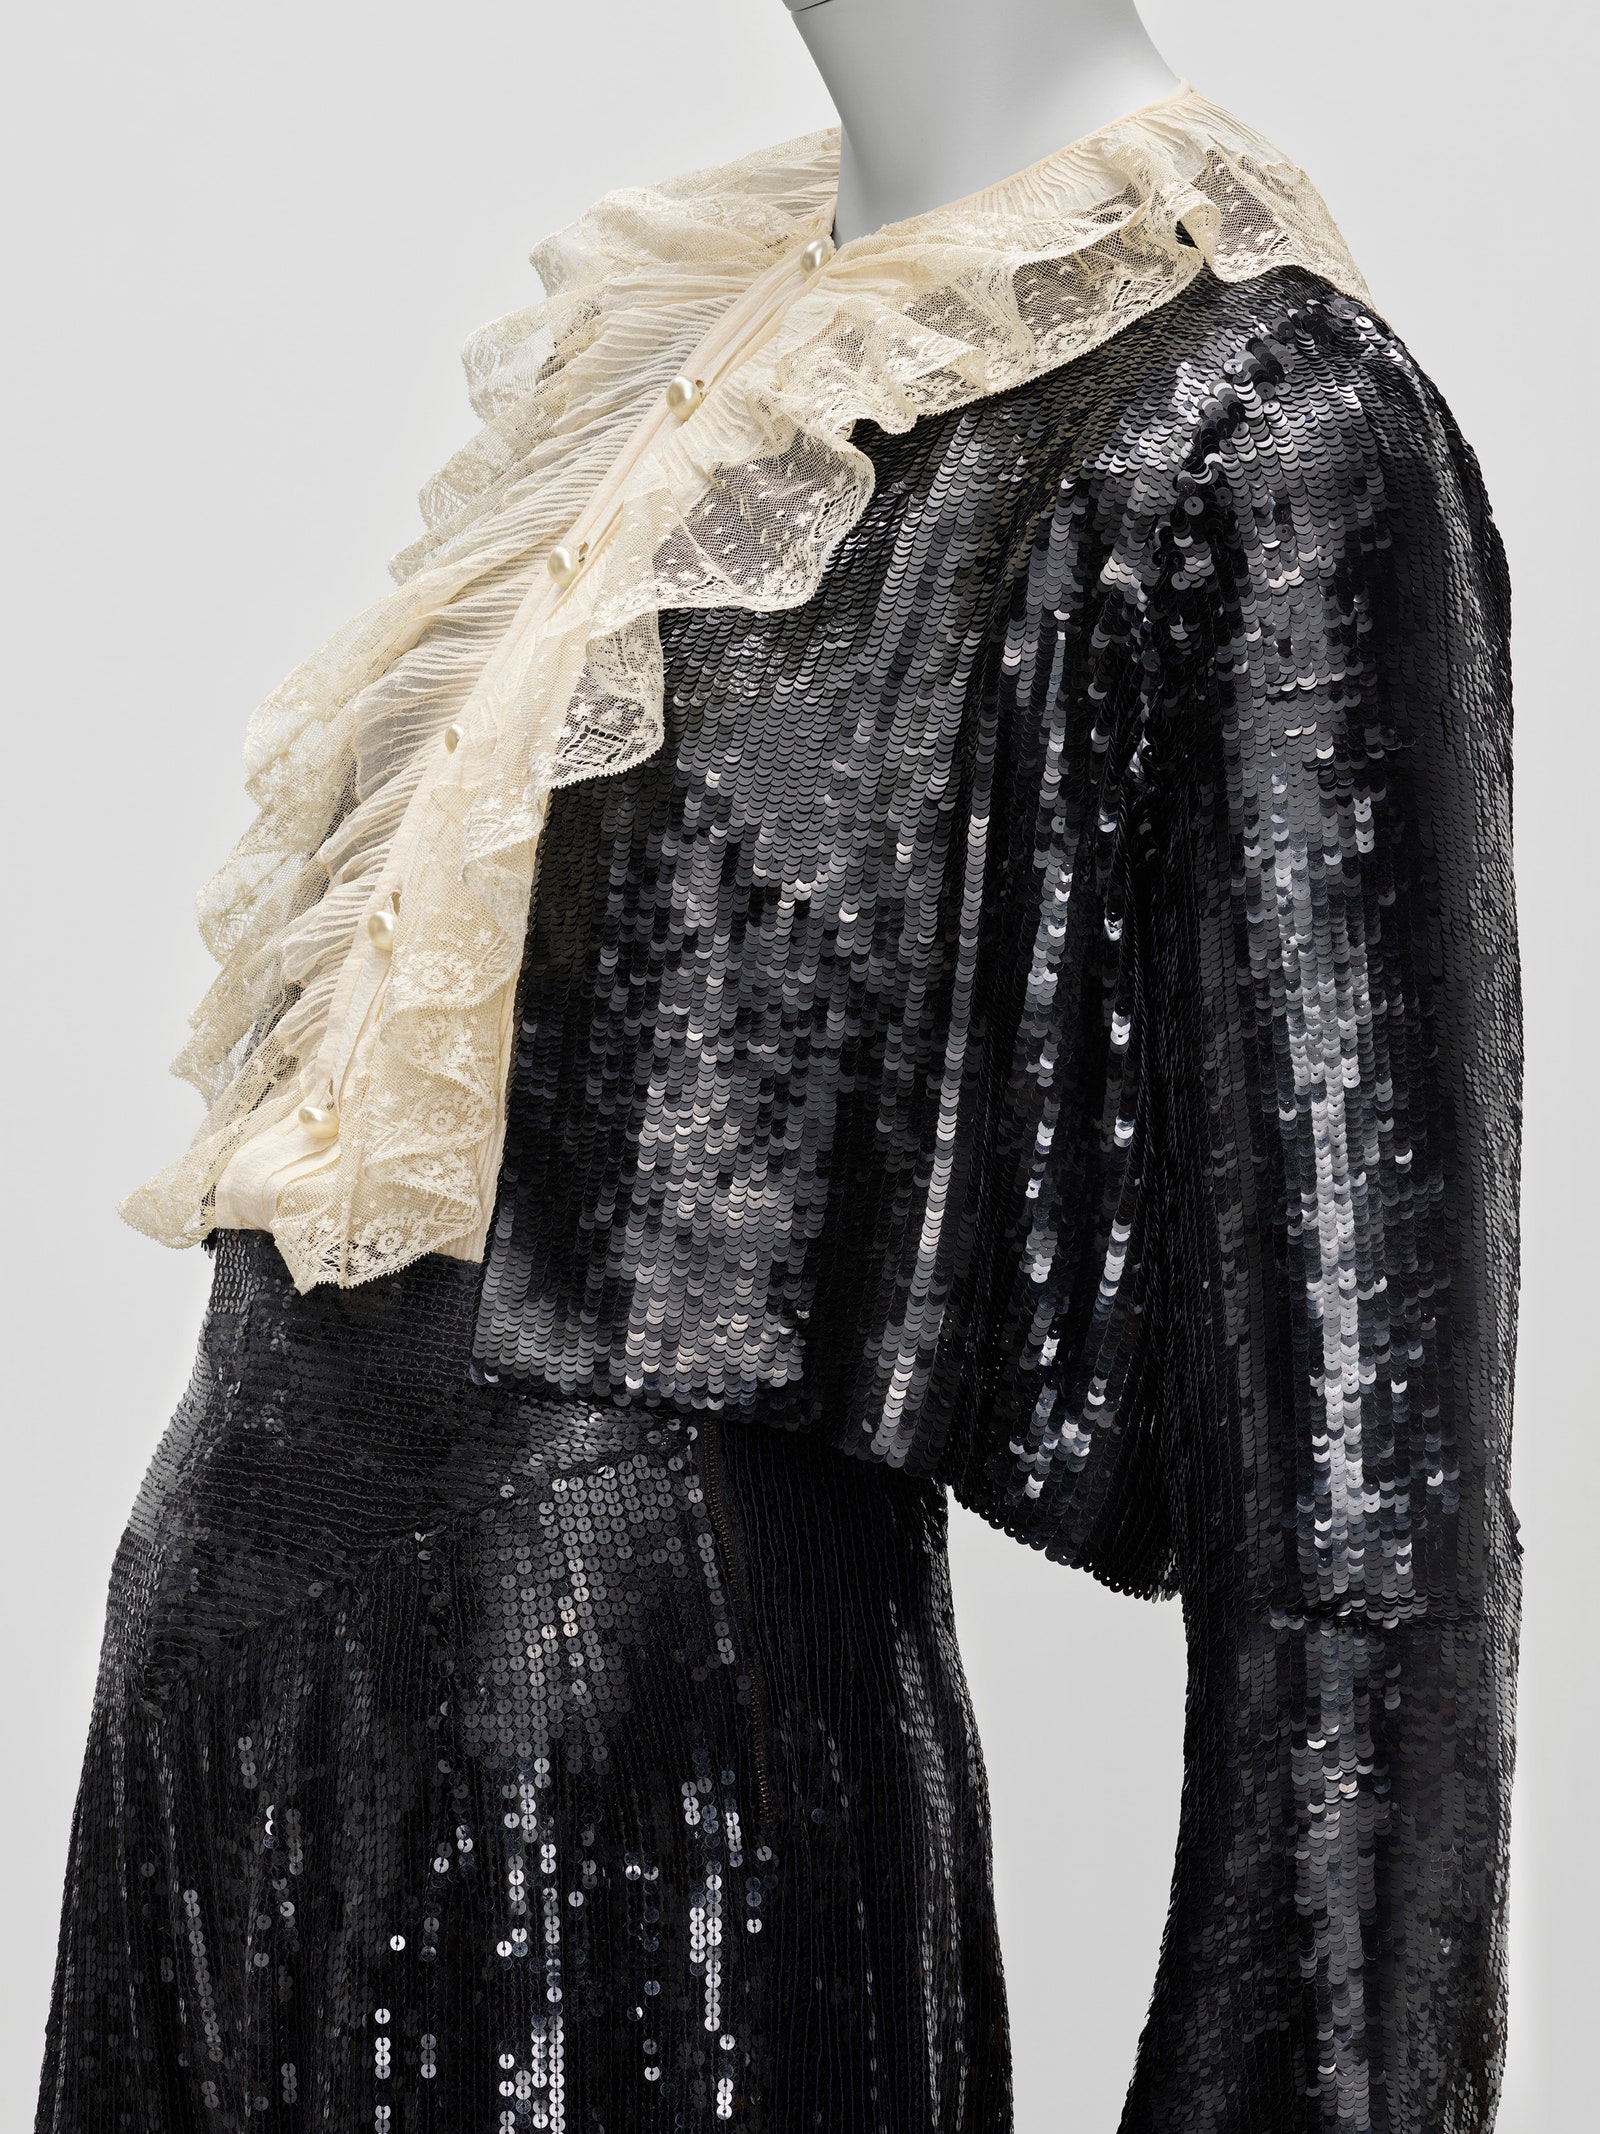 Diana Vreeland’s sequined Chanel trouser suit.